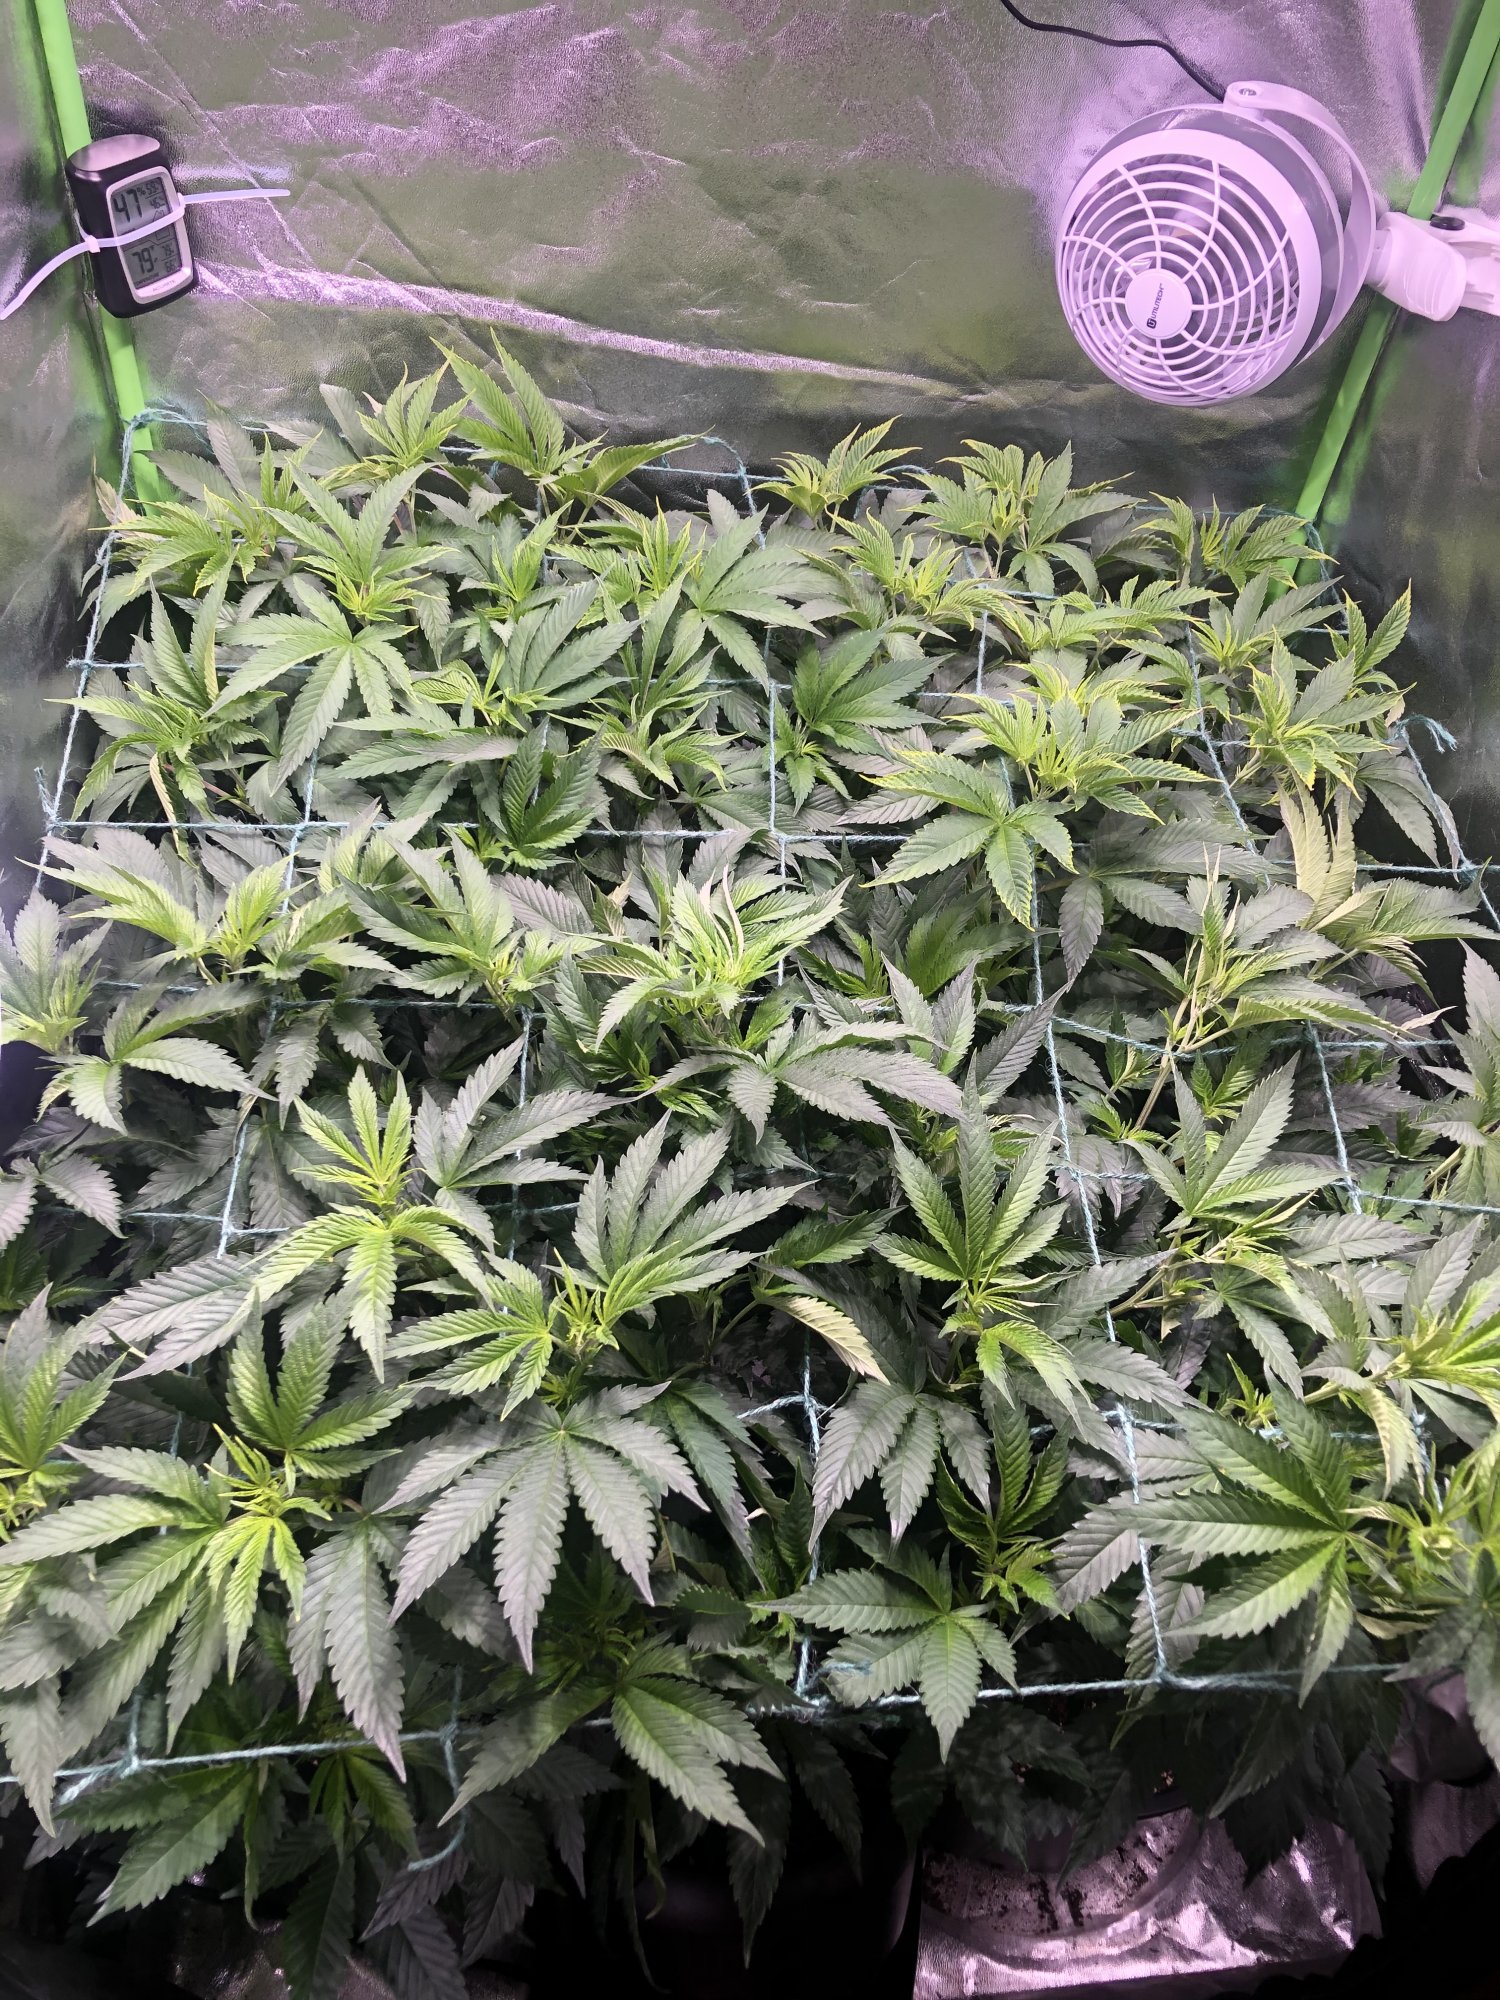 First scrog ever any tips